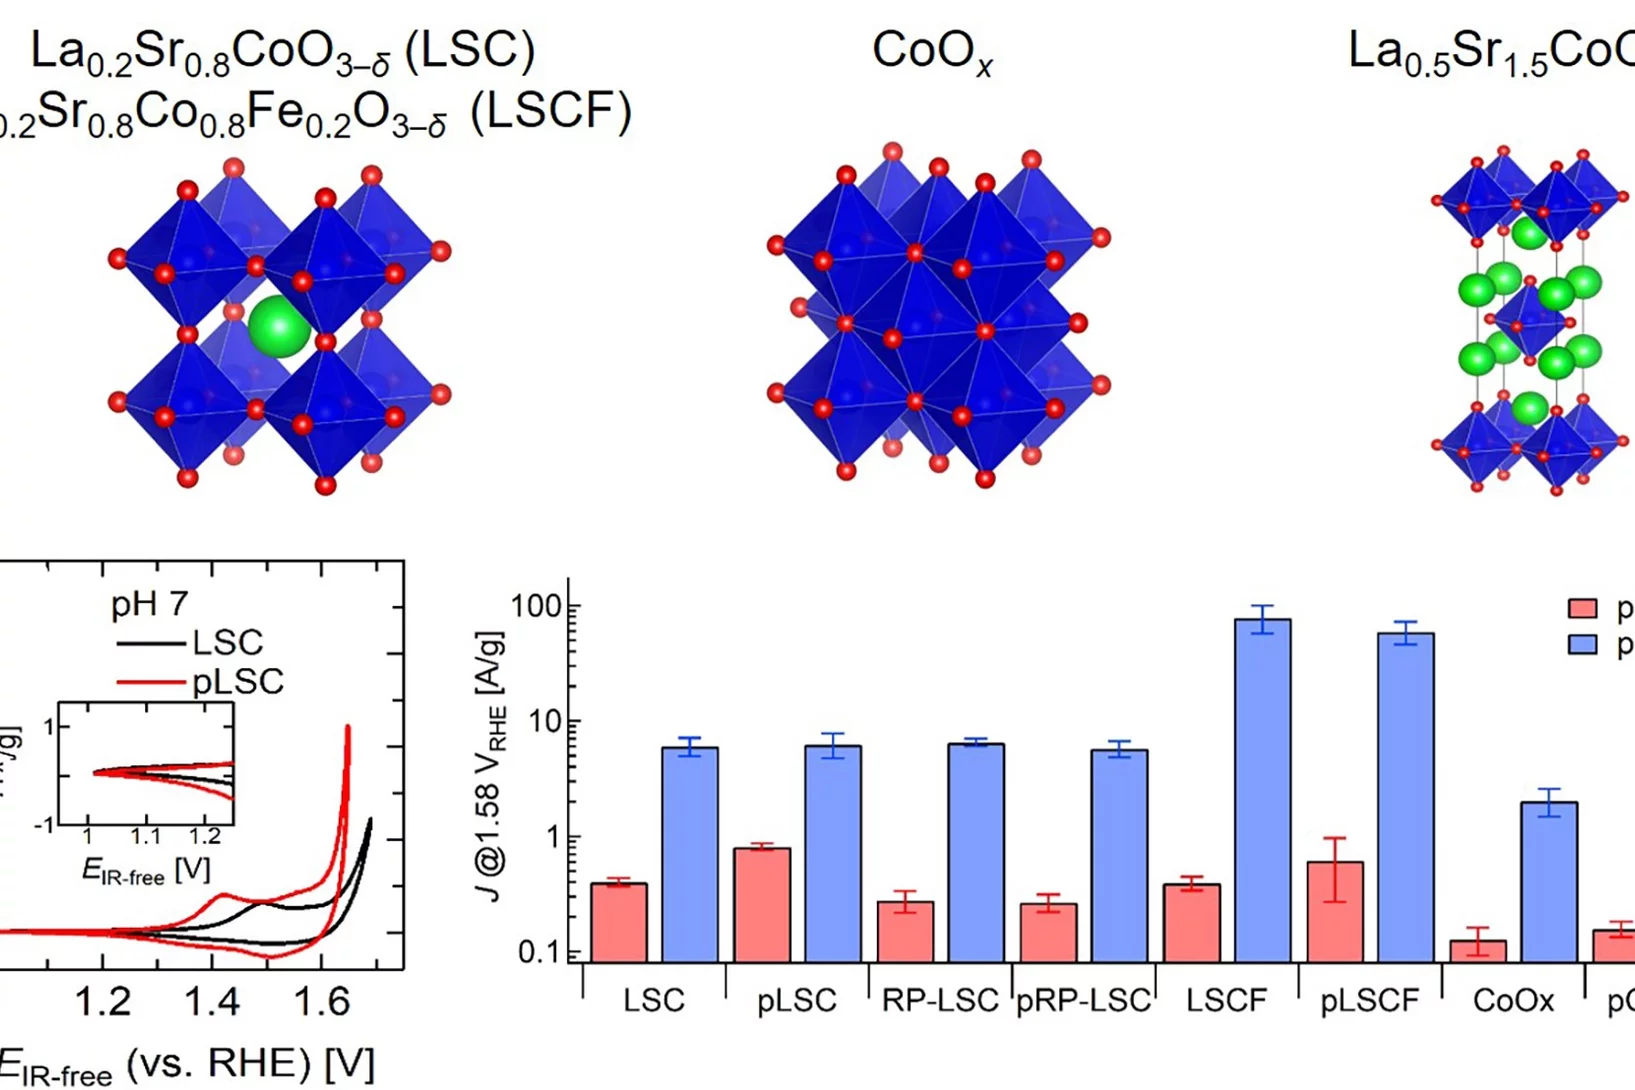 Crystal structure of the investigated cobalt-based oxides.